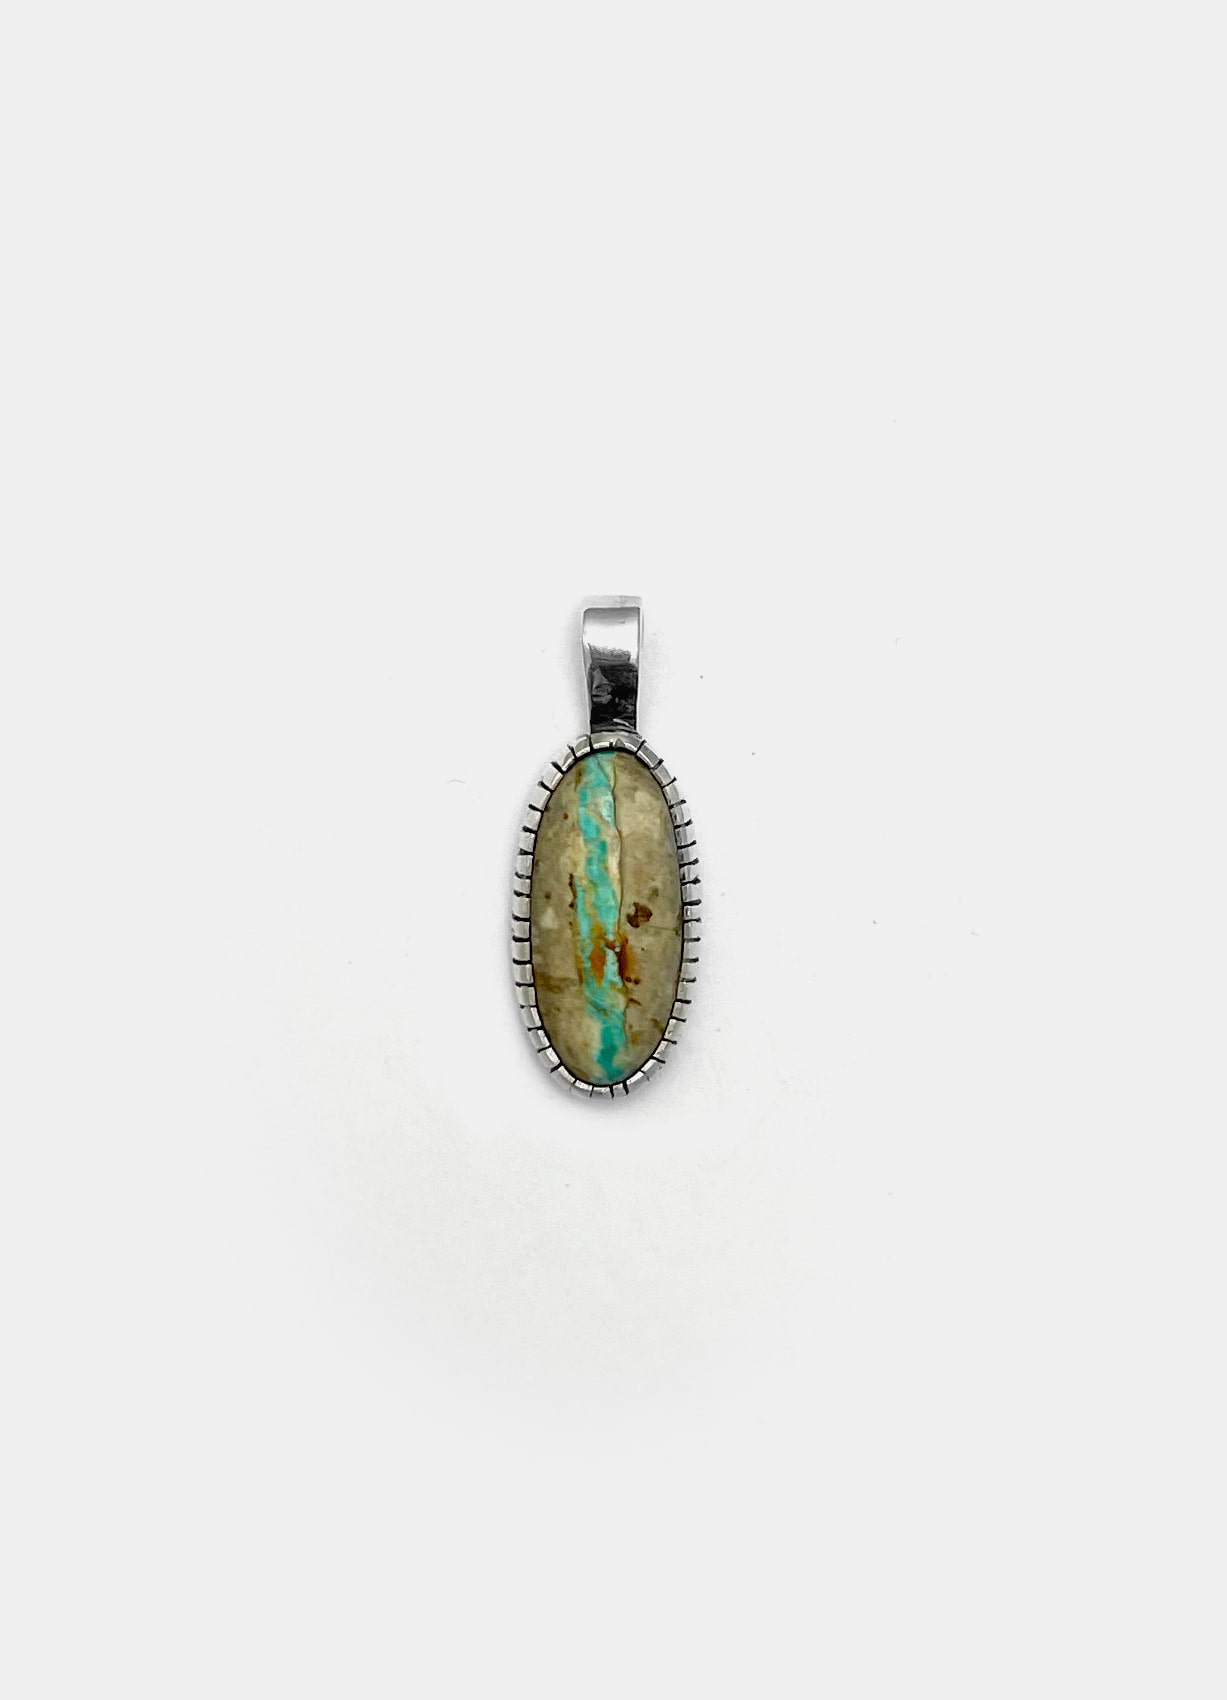 Turquoise Silver Pendant #023